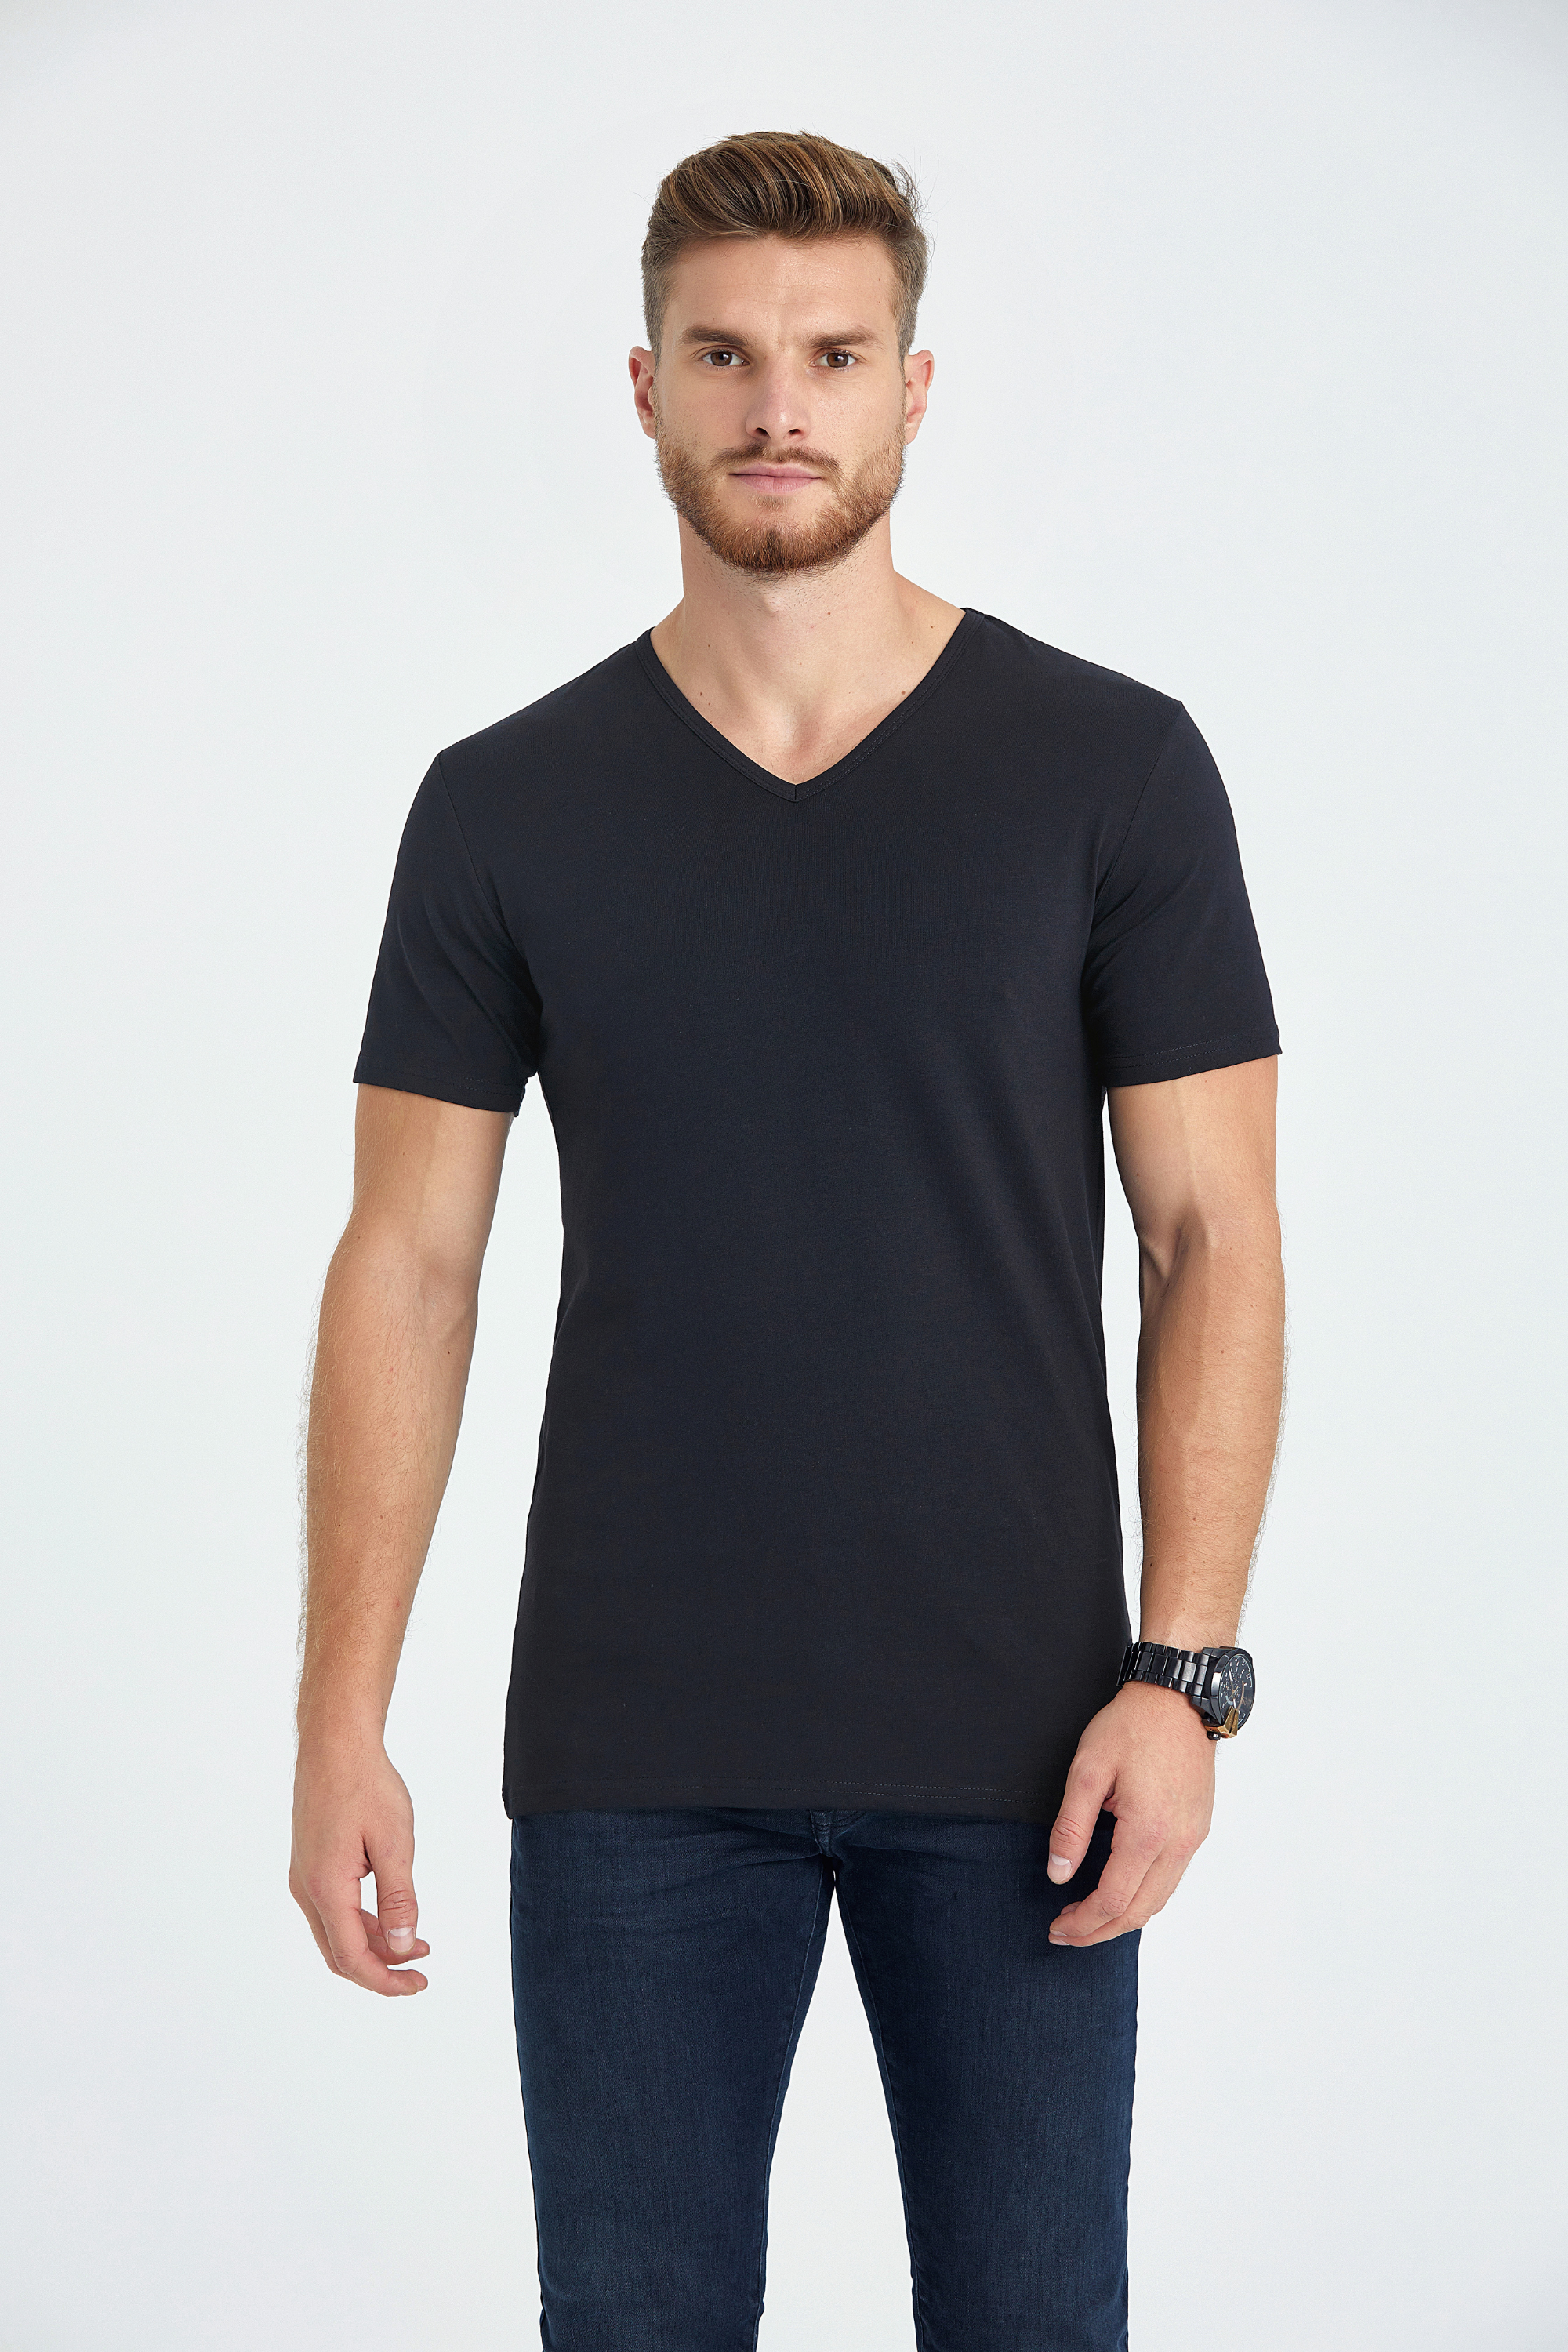 Arsenal Black For Man | Vary Fits – FITS